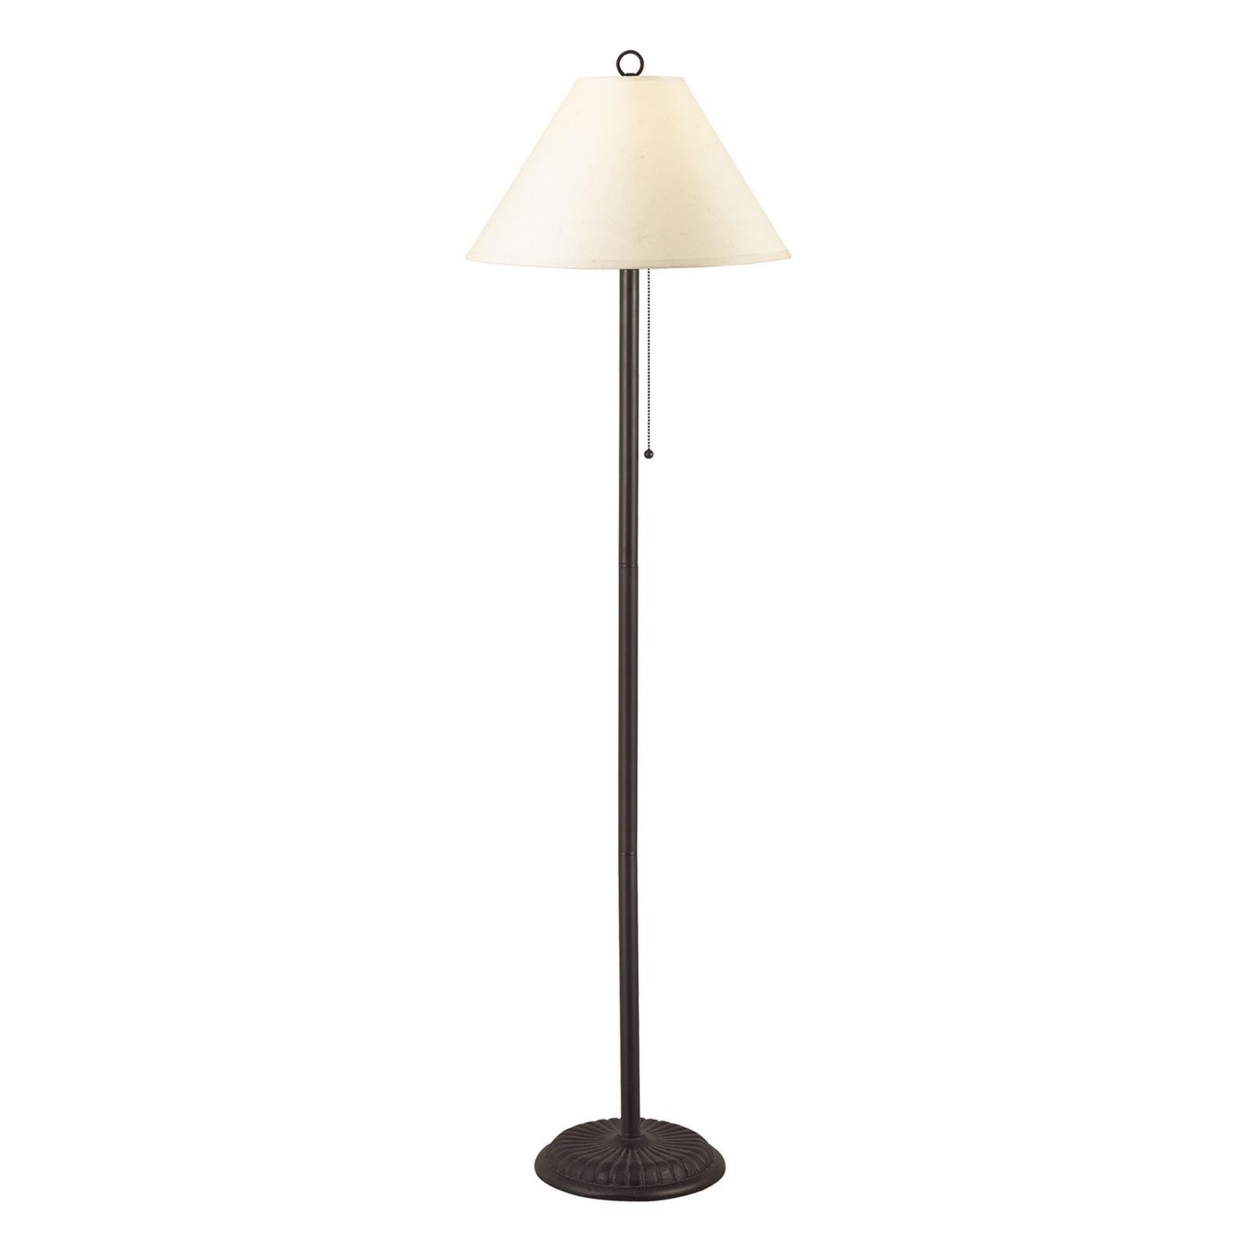 Metal Floor Lamp With Pull Chain Switch And Paper Shade, Off White And Black- Saltoro Sherpi